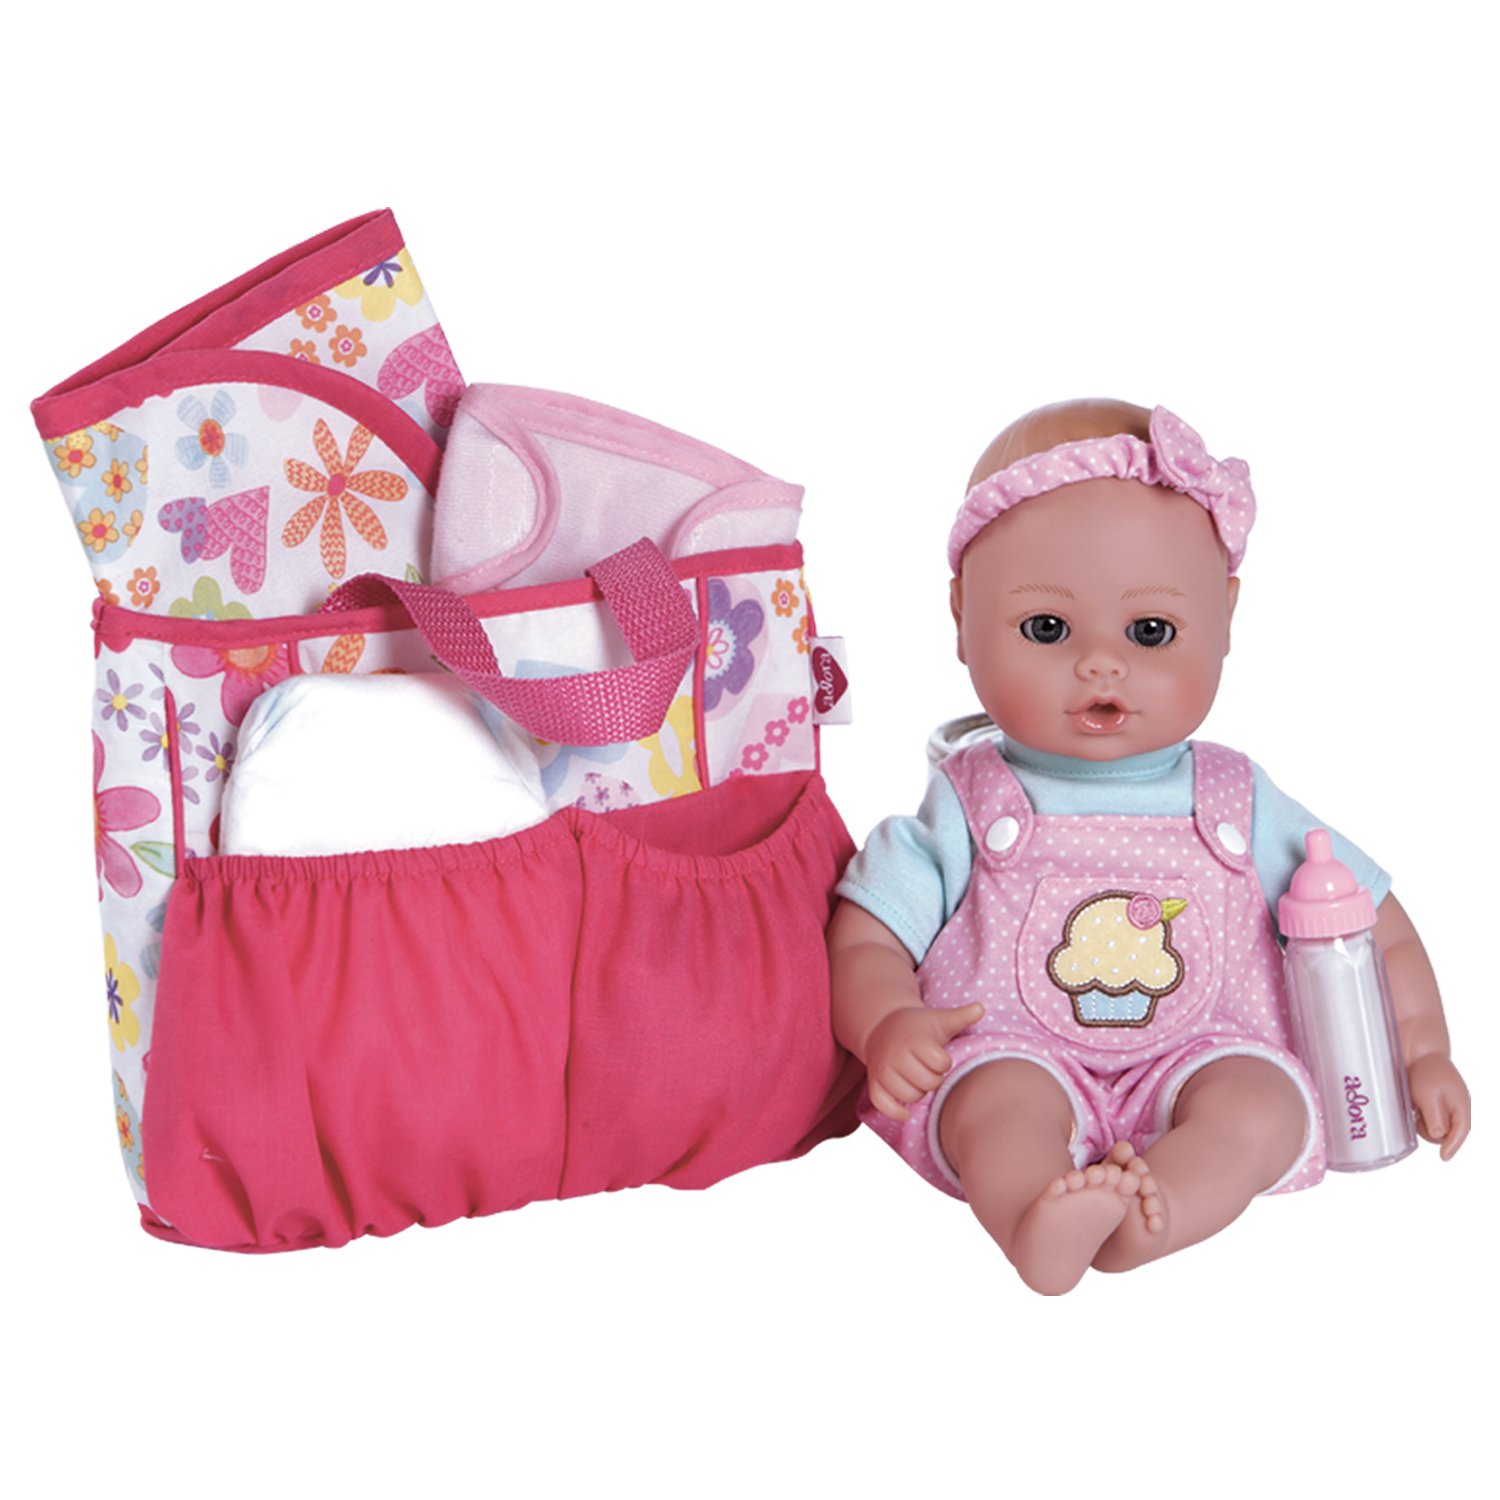 Adora 20603021 Baby Doll Diaper Bag Accessories with 5Piece Changing Set